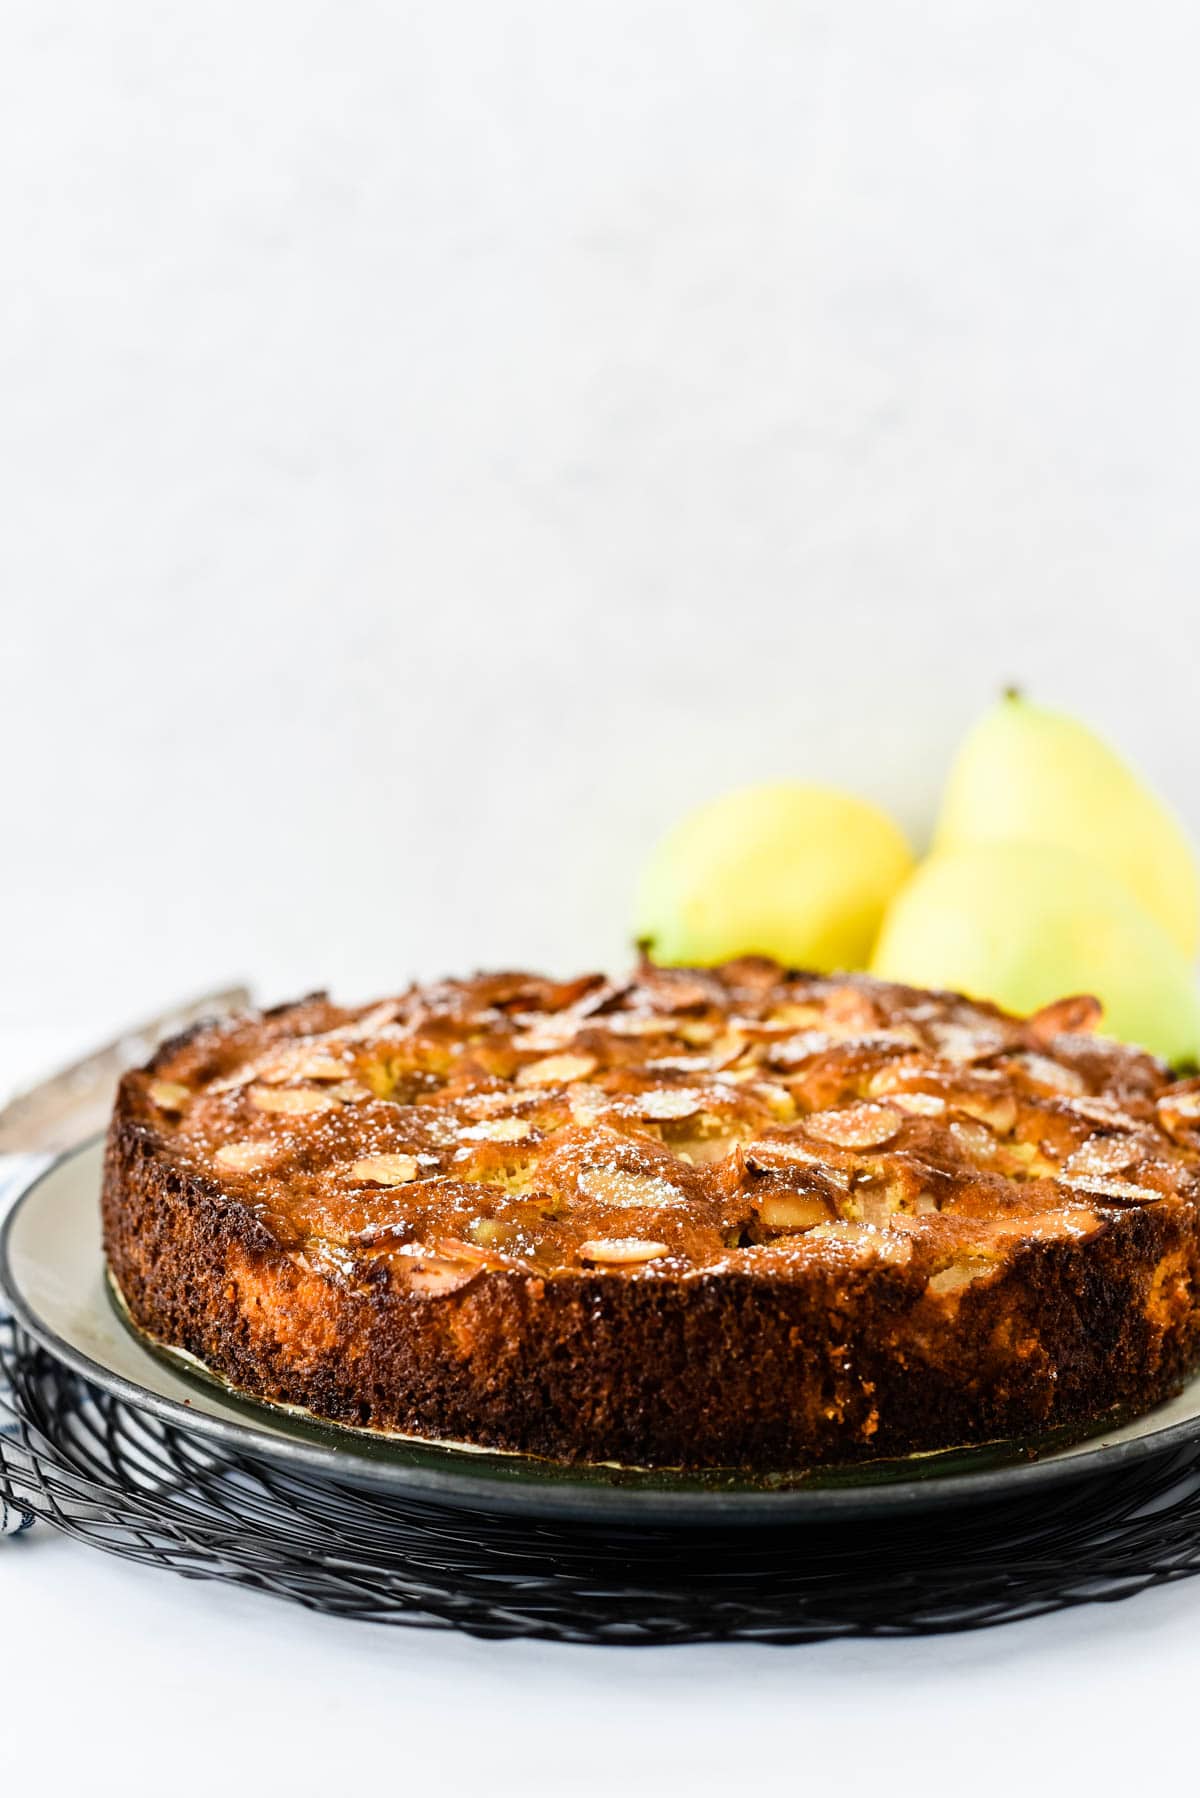 pear almond cake on platter with pears behind